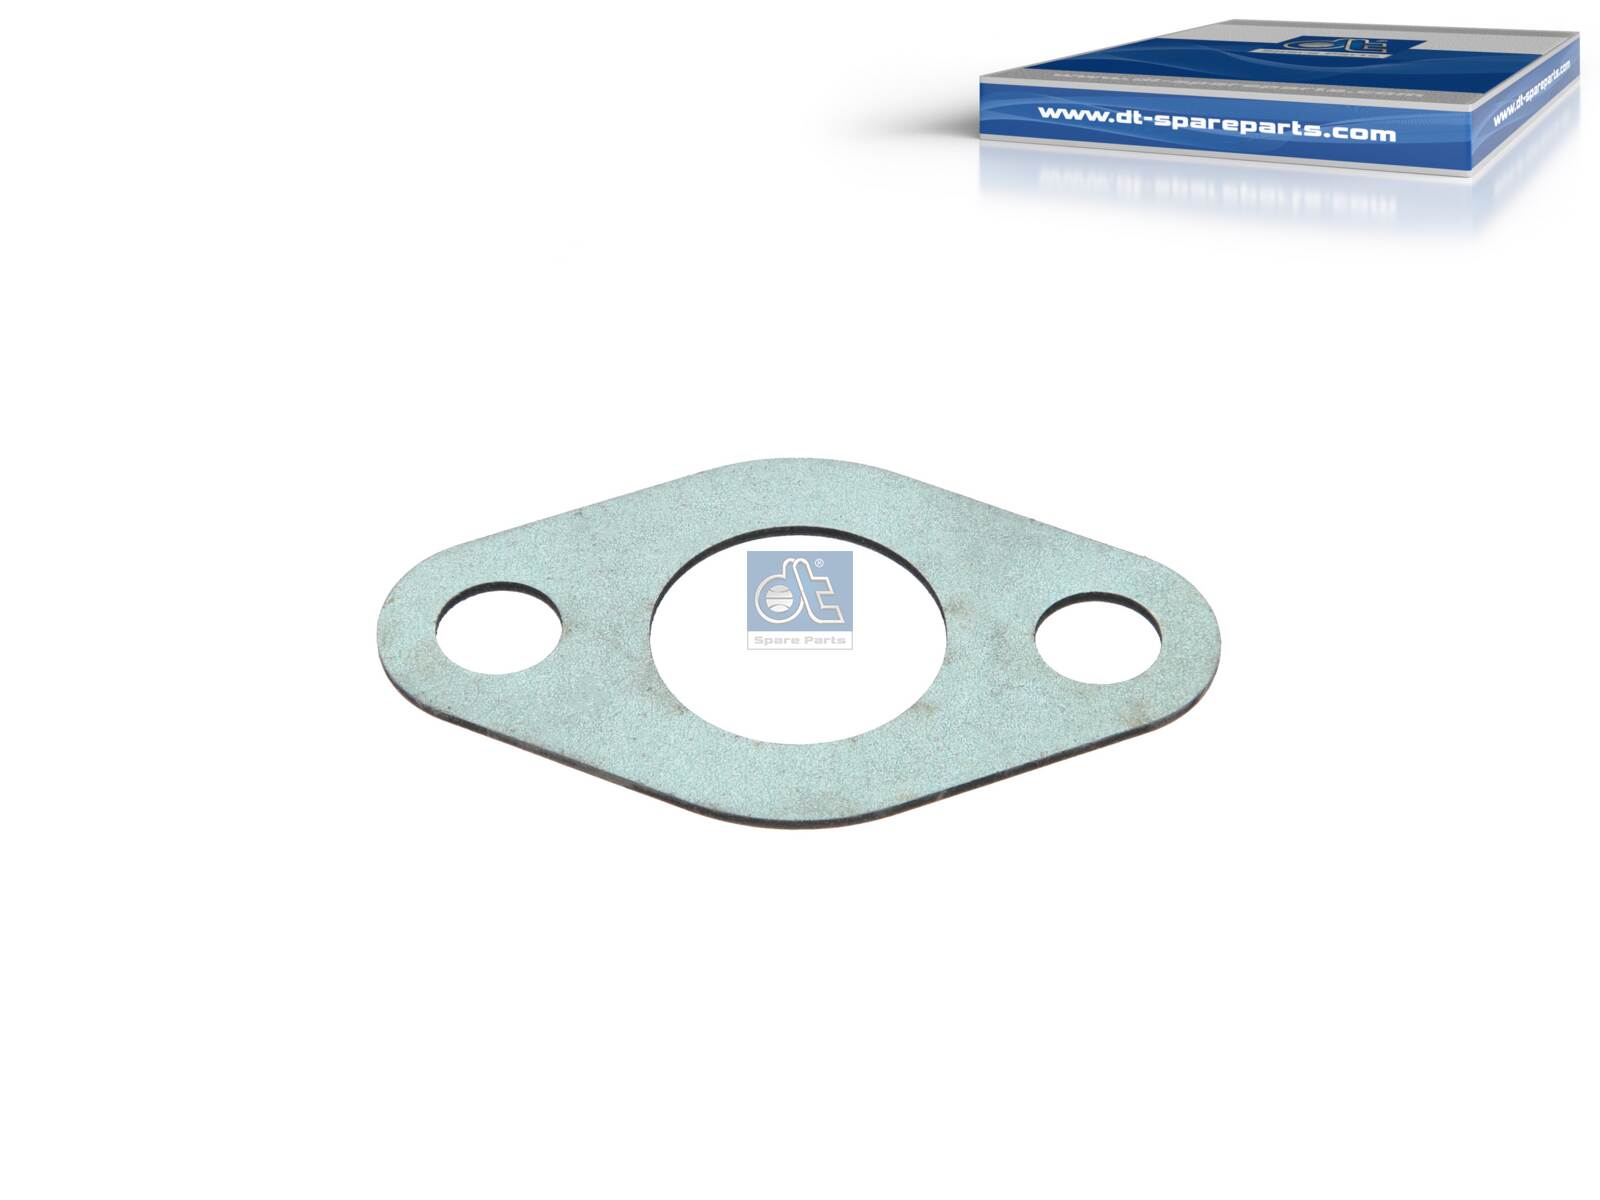 3.19101, Gasket, charger, DT Spare Parts, 51.96601.0240, 51.96601.0383, 0211.509, 21890, 50-92108-00, 211.509, 21890.00, 51.96601-0240, 51.96601-0383, 51966010240, 51966010383